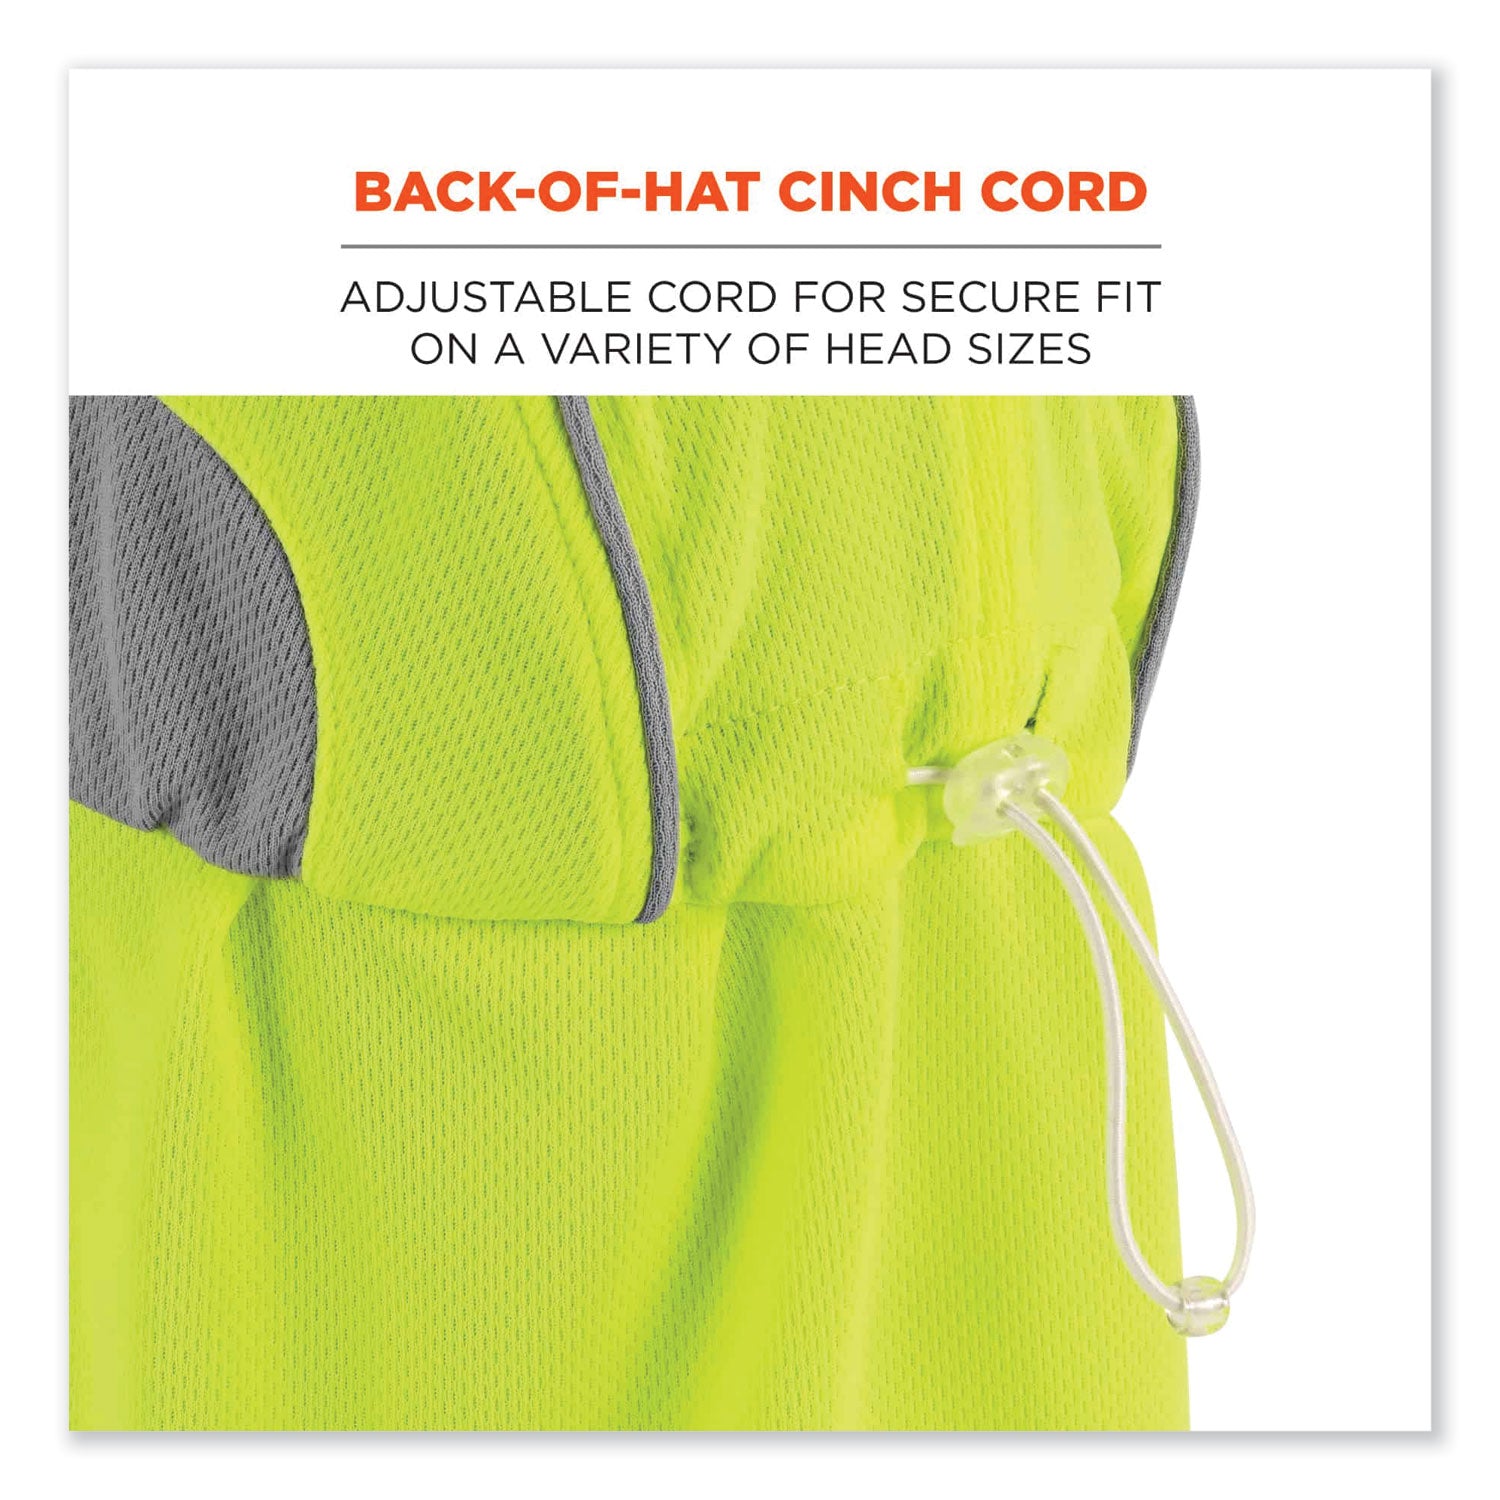 chill-its-6650-high-performance-hat-plus-neck-shade-polyester-one-size-fits-most-lime-ships-in-1-3-business-days_ego12520 - 7